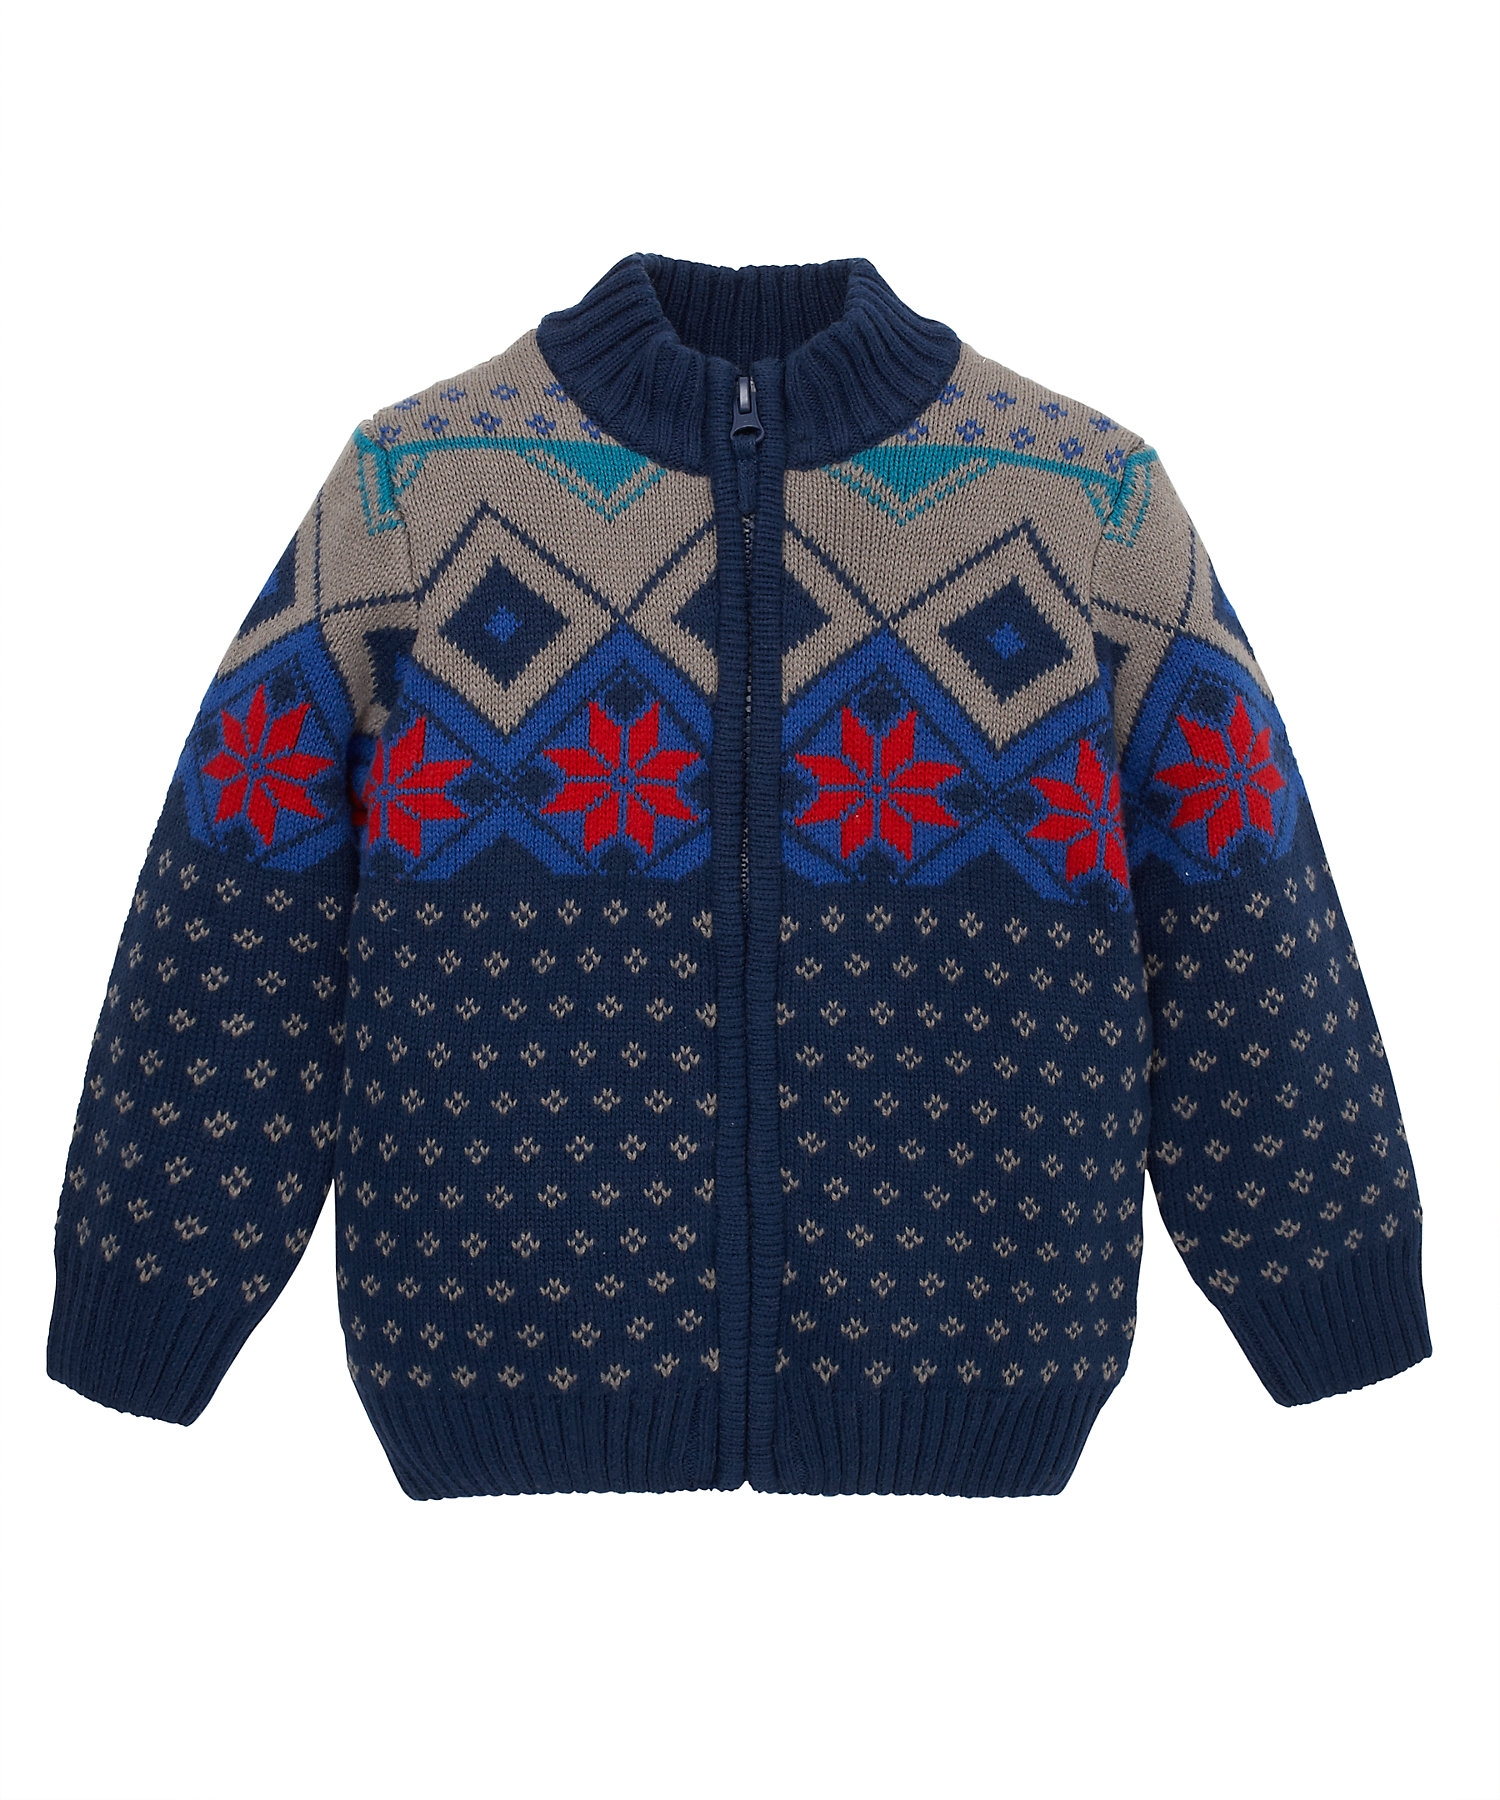 Mothercare | Boys Full Sleeves Sweaters Floral Boho Design-Navy